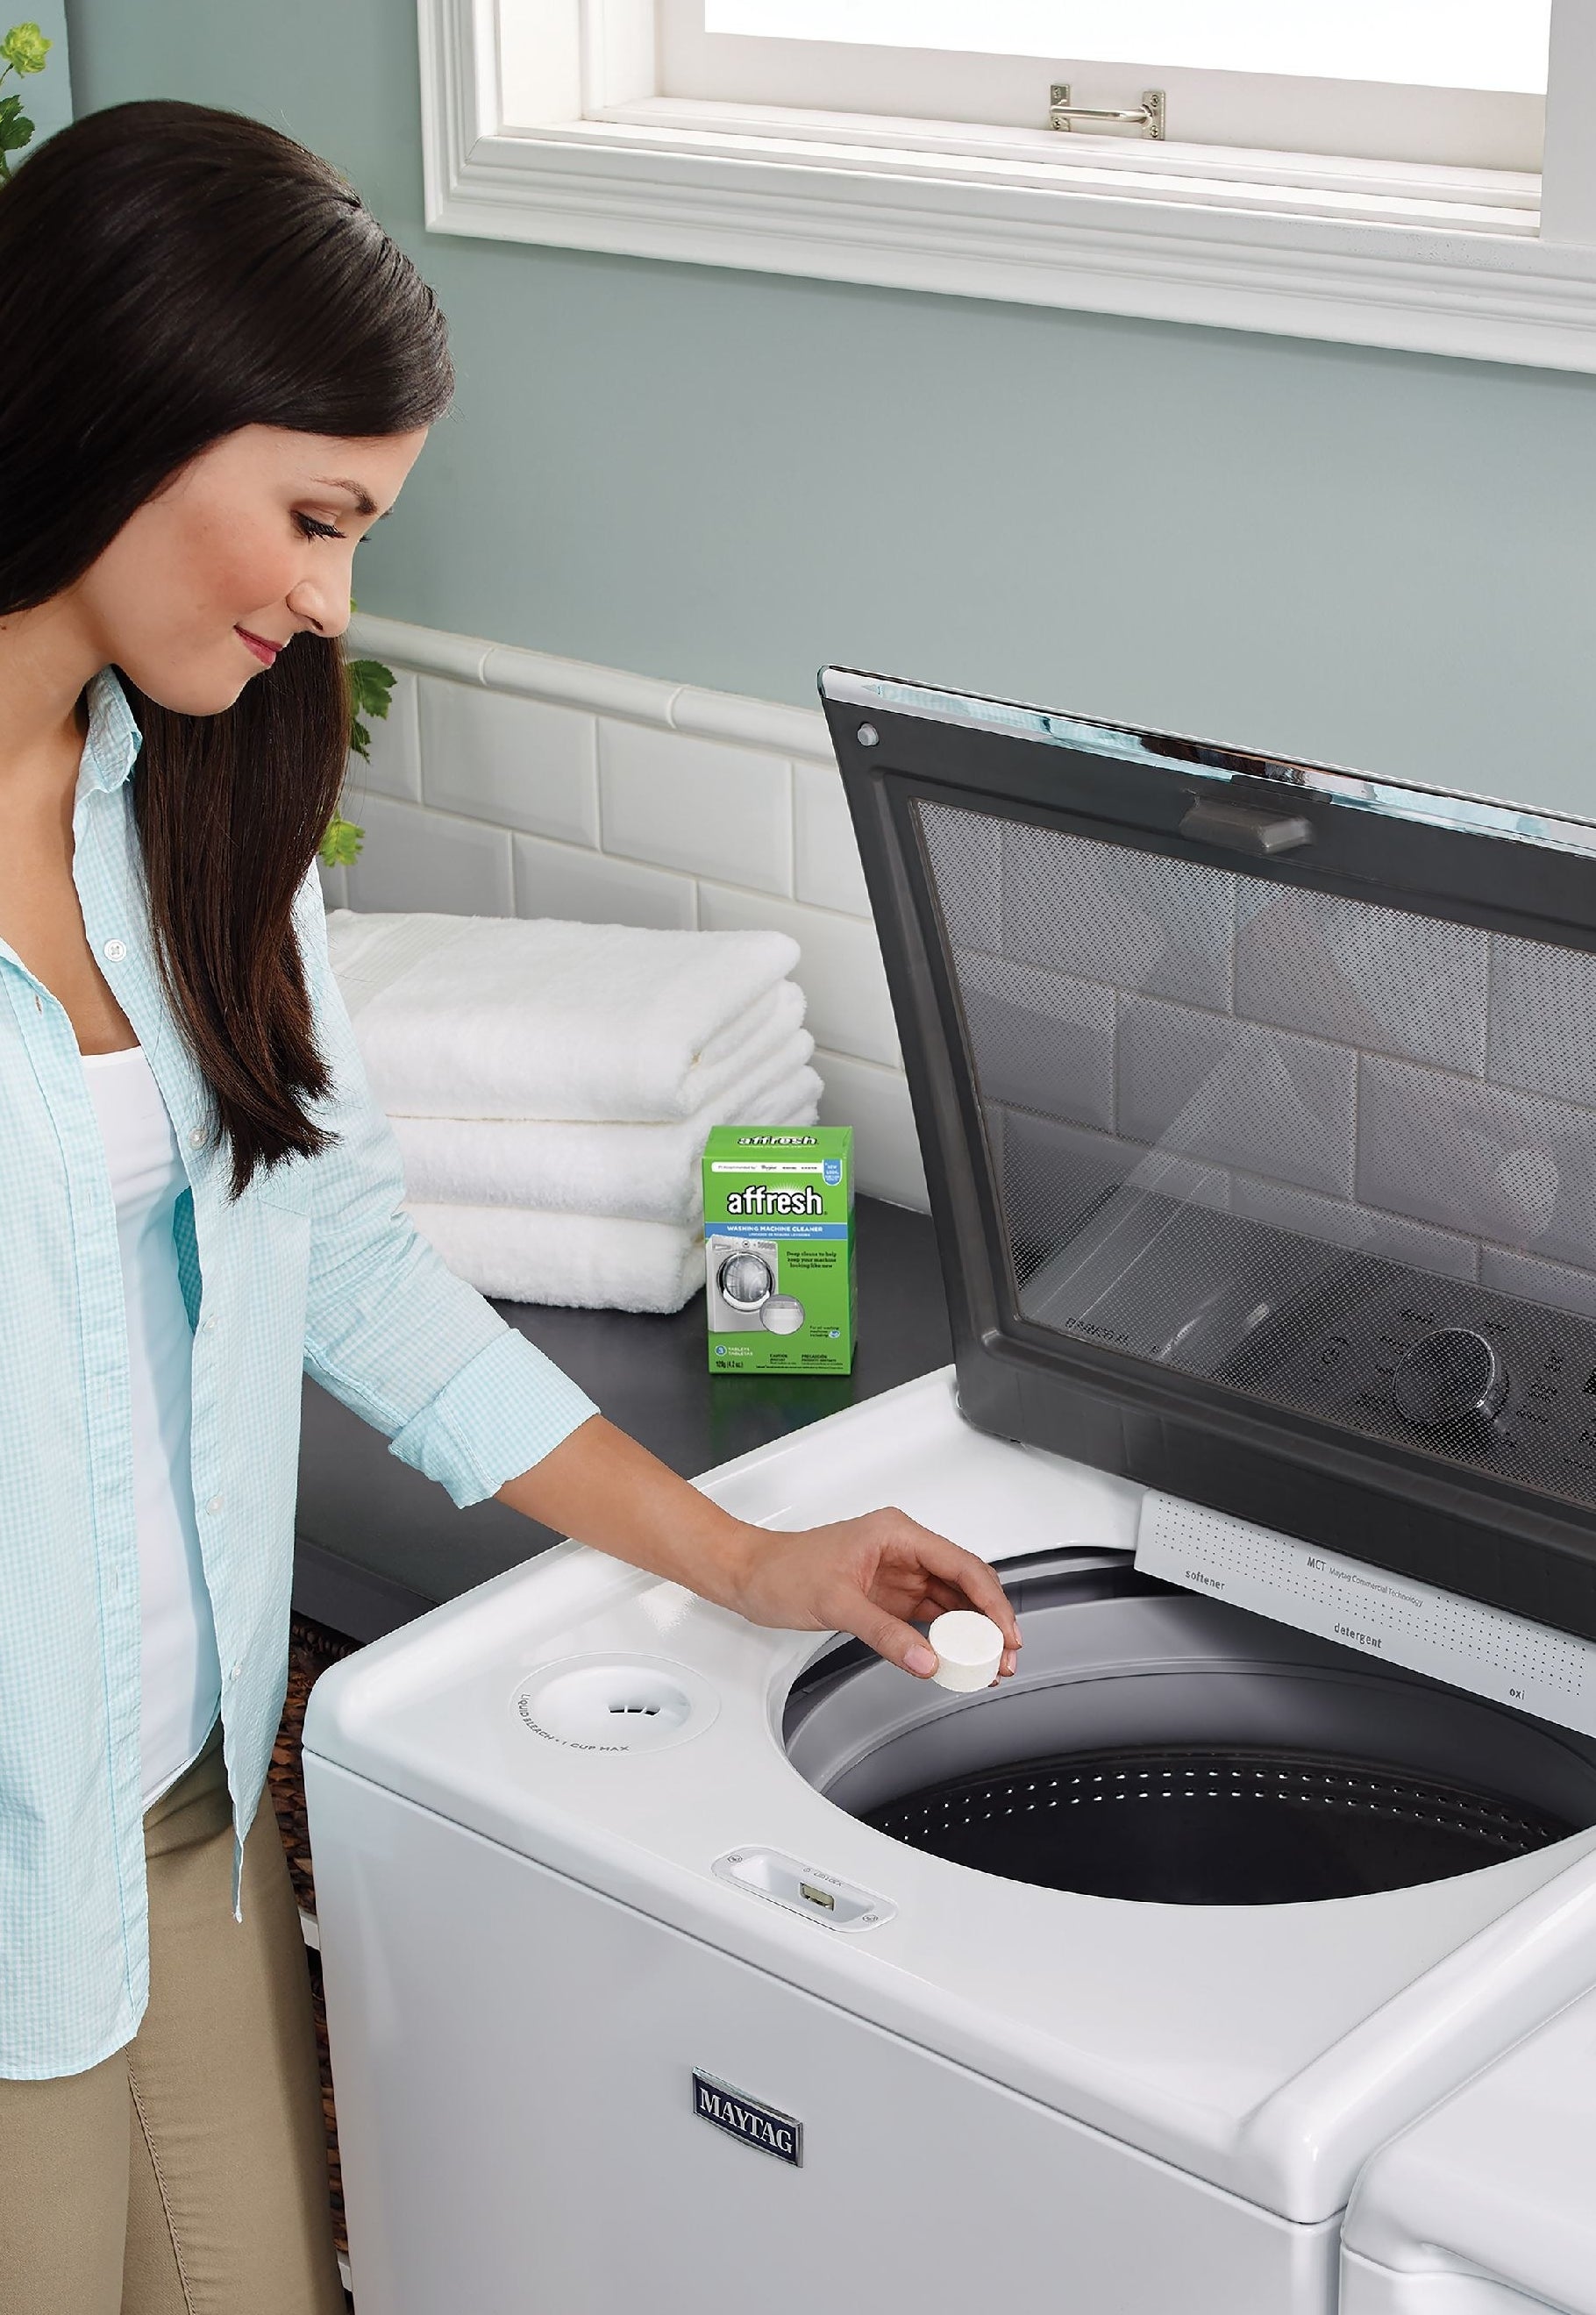 Model uses a white machine cleaning tablet from the green box